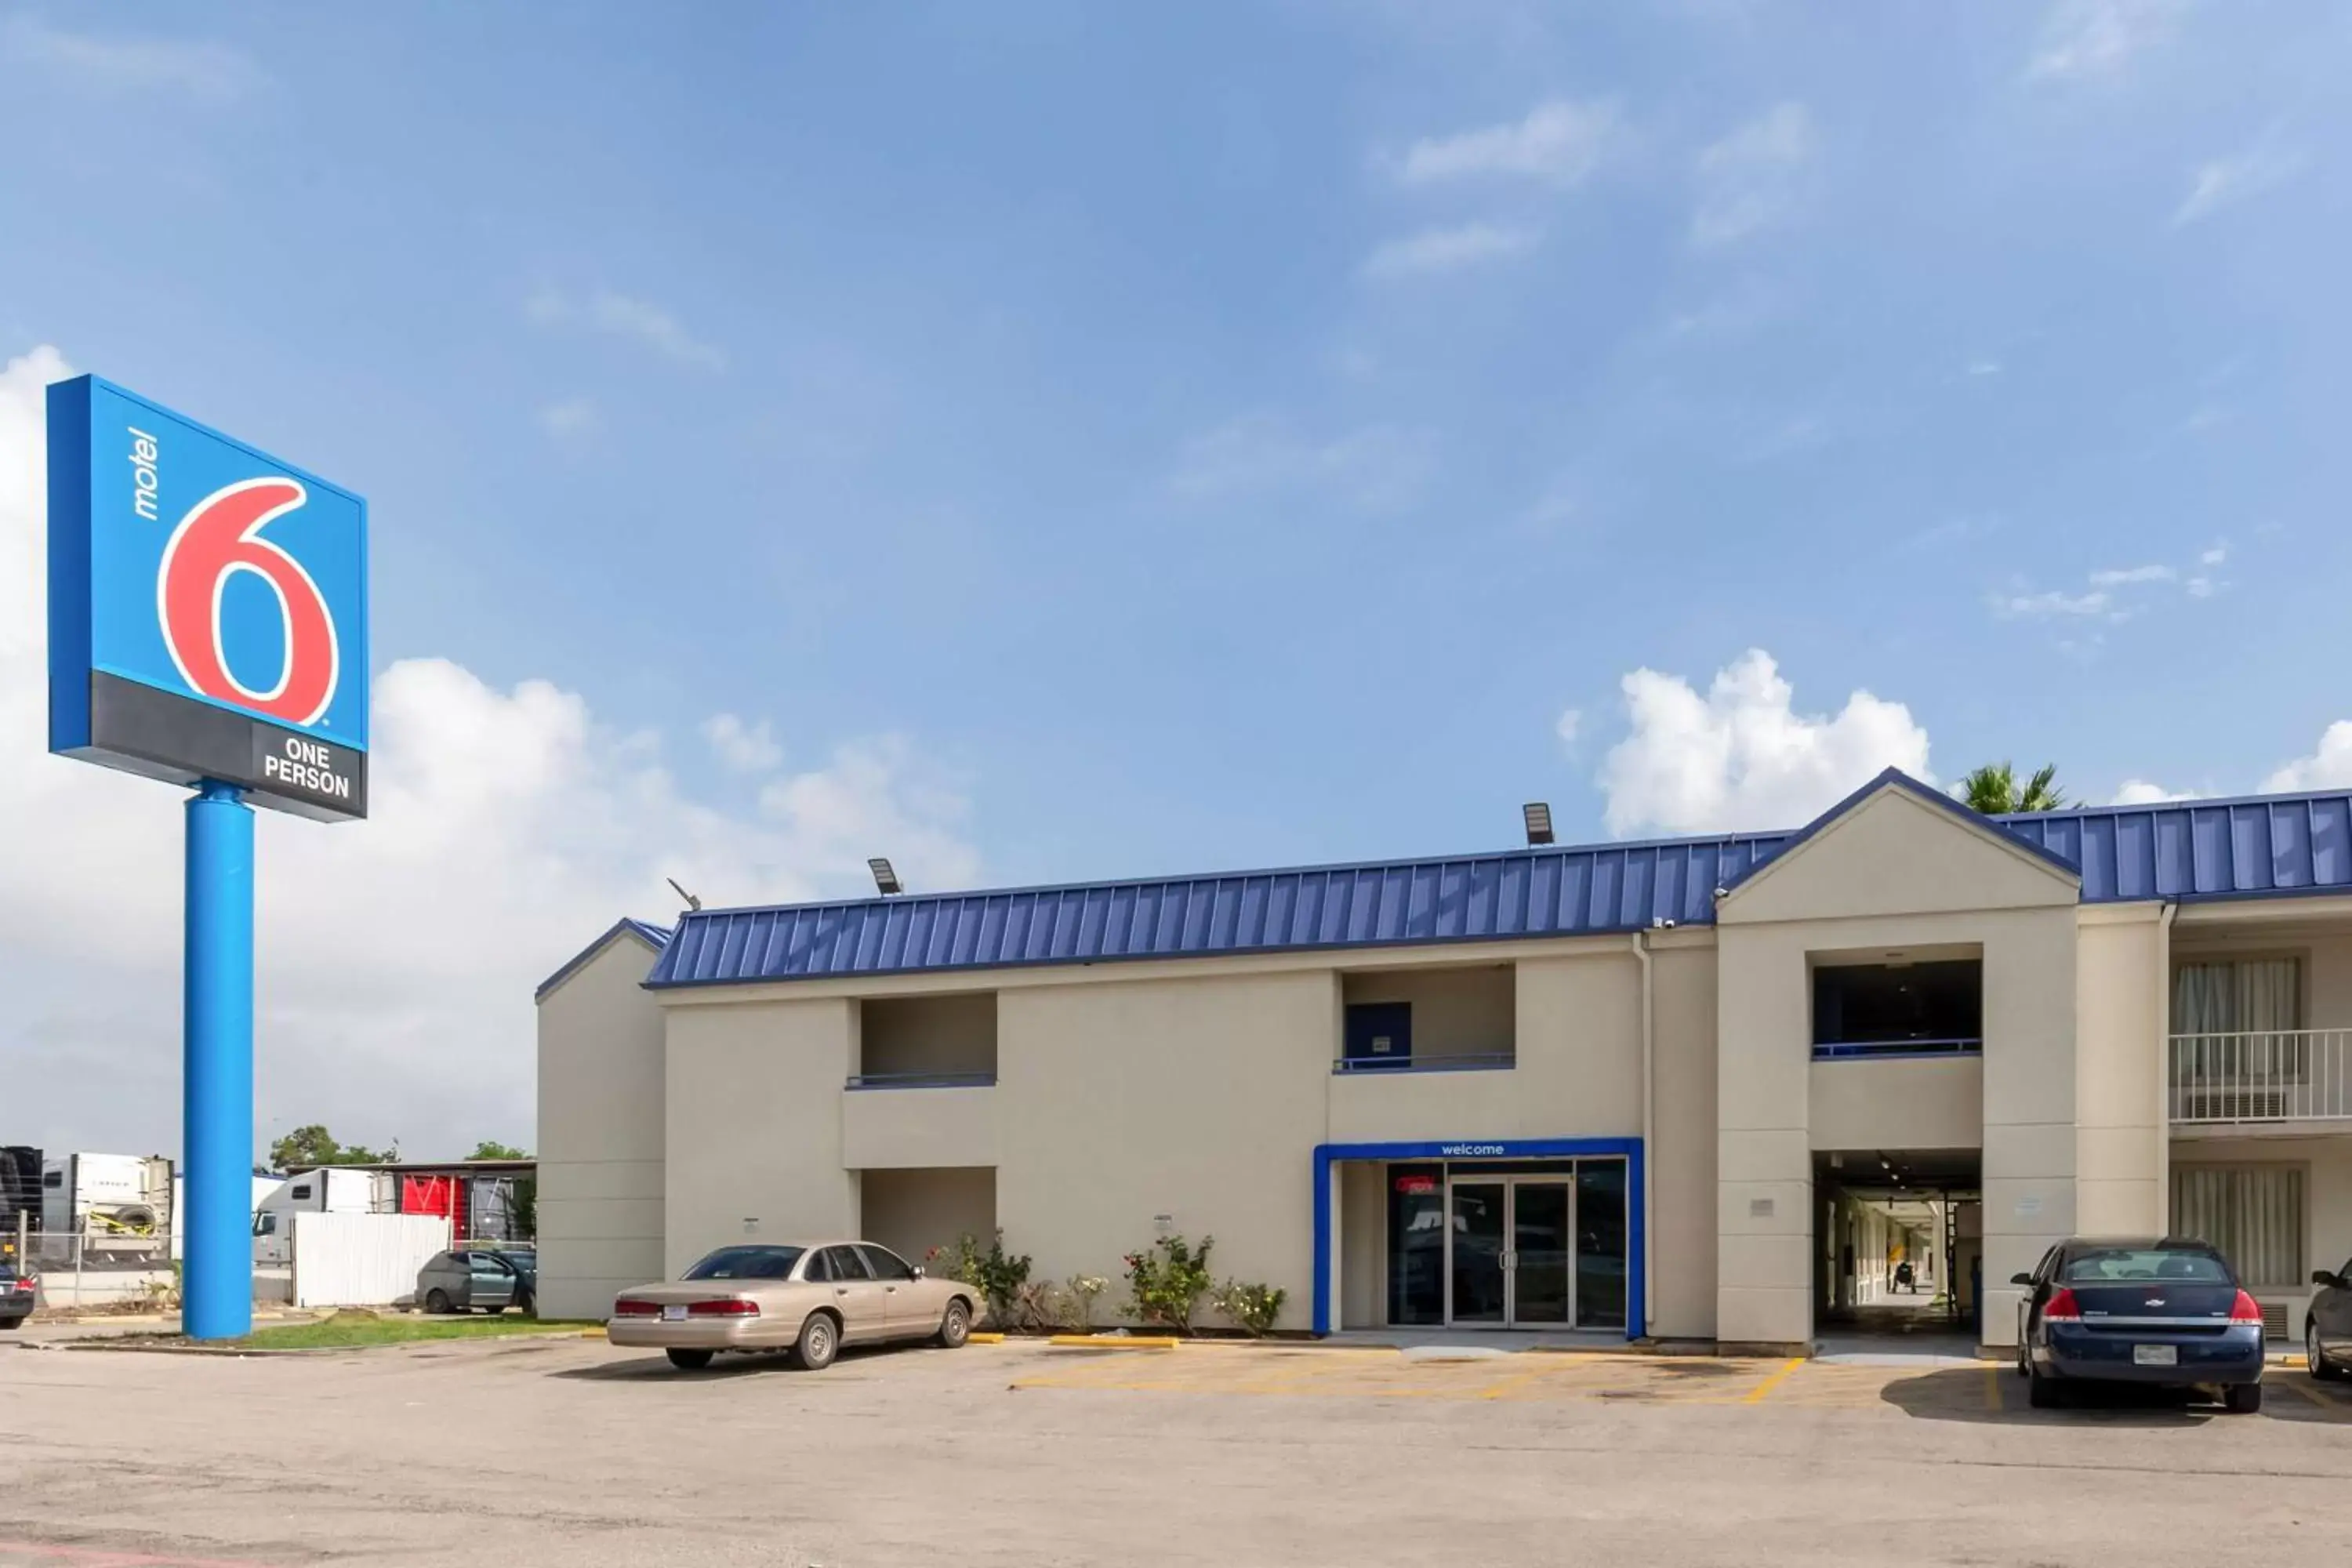 Property building in Motel 6-Houston, TX - East